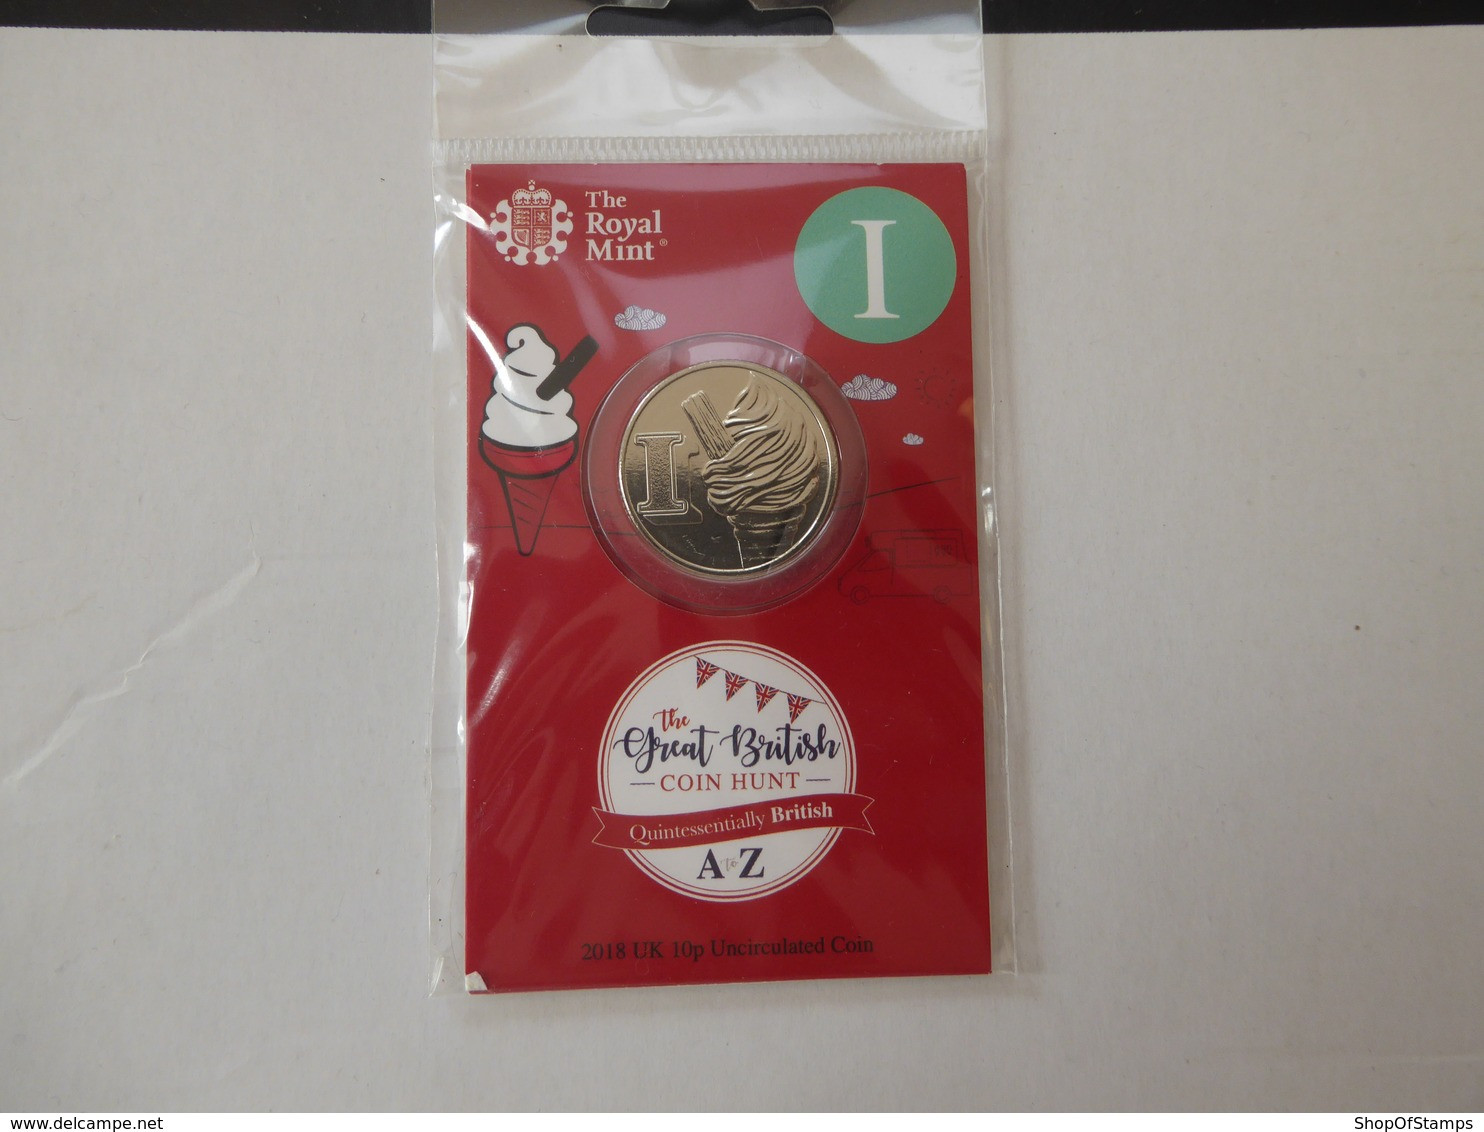 GREAT BRITAIN COINS BRITISH COIN HUNT A To Z Series Uncirculated Mint In Packet Letter  I - 10 Pence & 10 New Pence